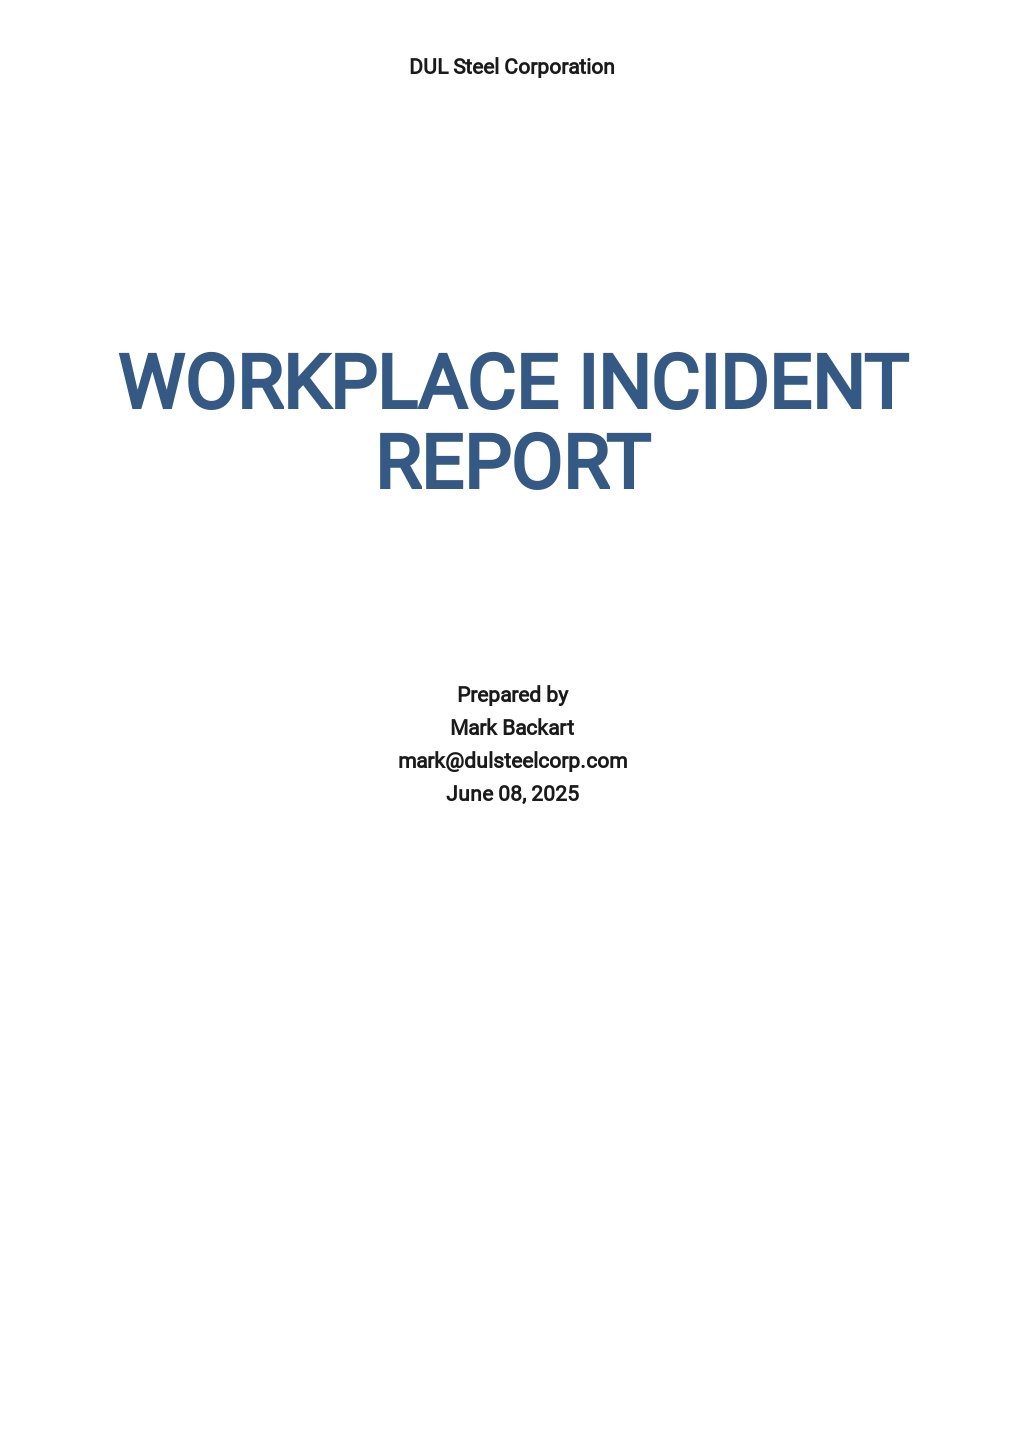 Free Workplace Incident Report Template.jpe